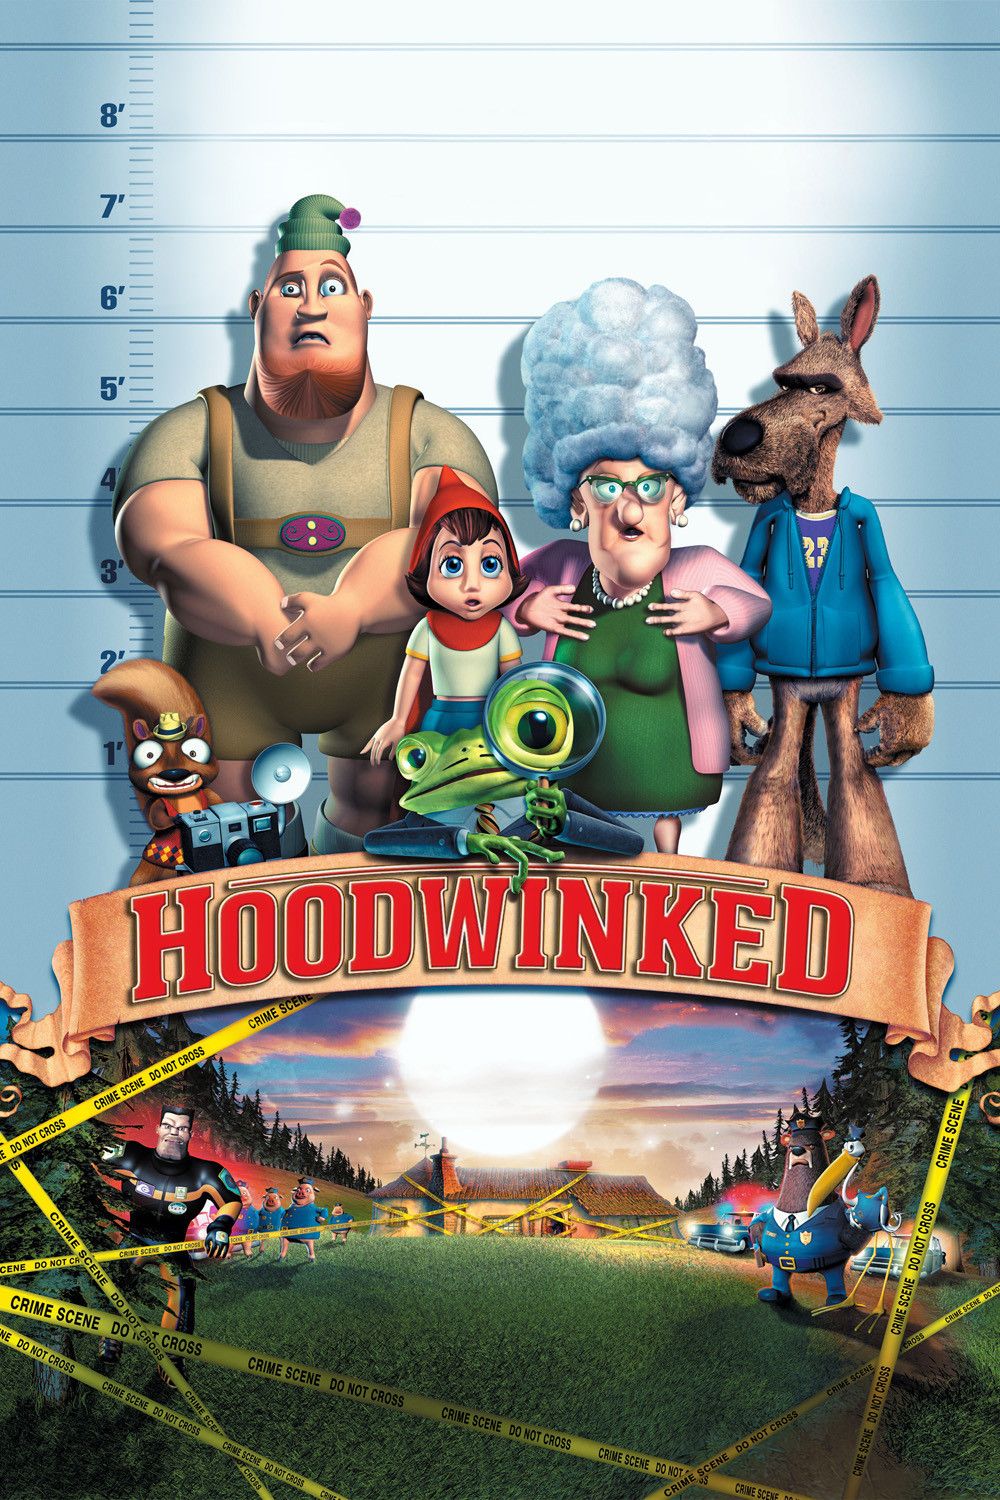 Hoodwinked Films Movies 00s Posters Animation Movie